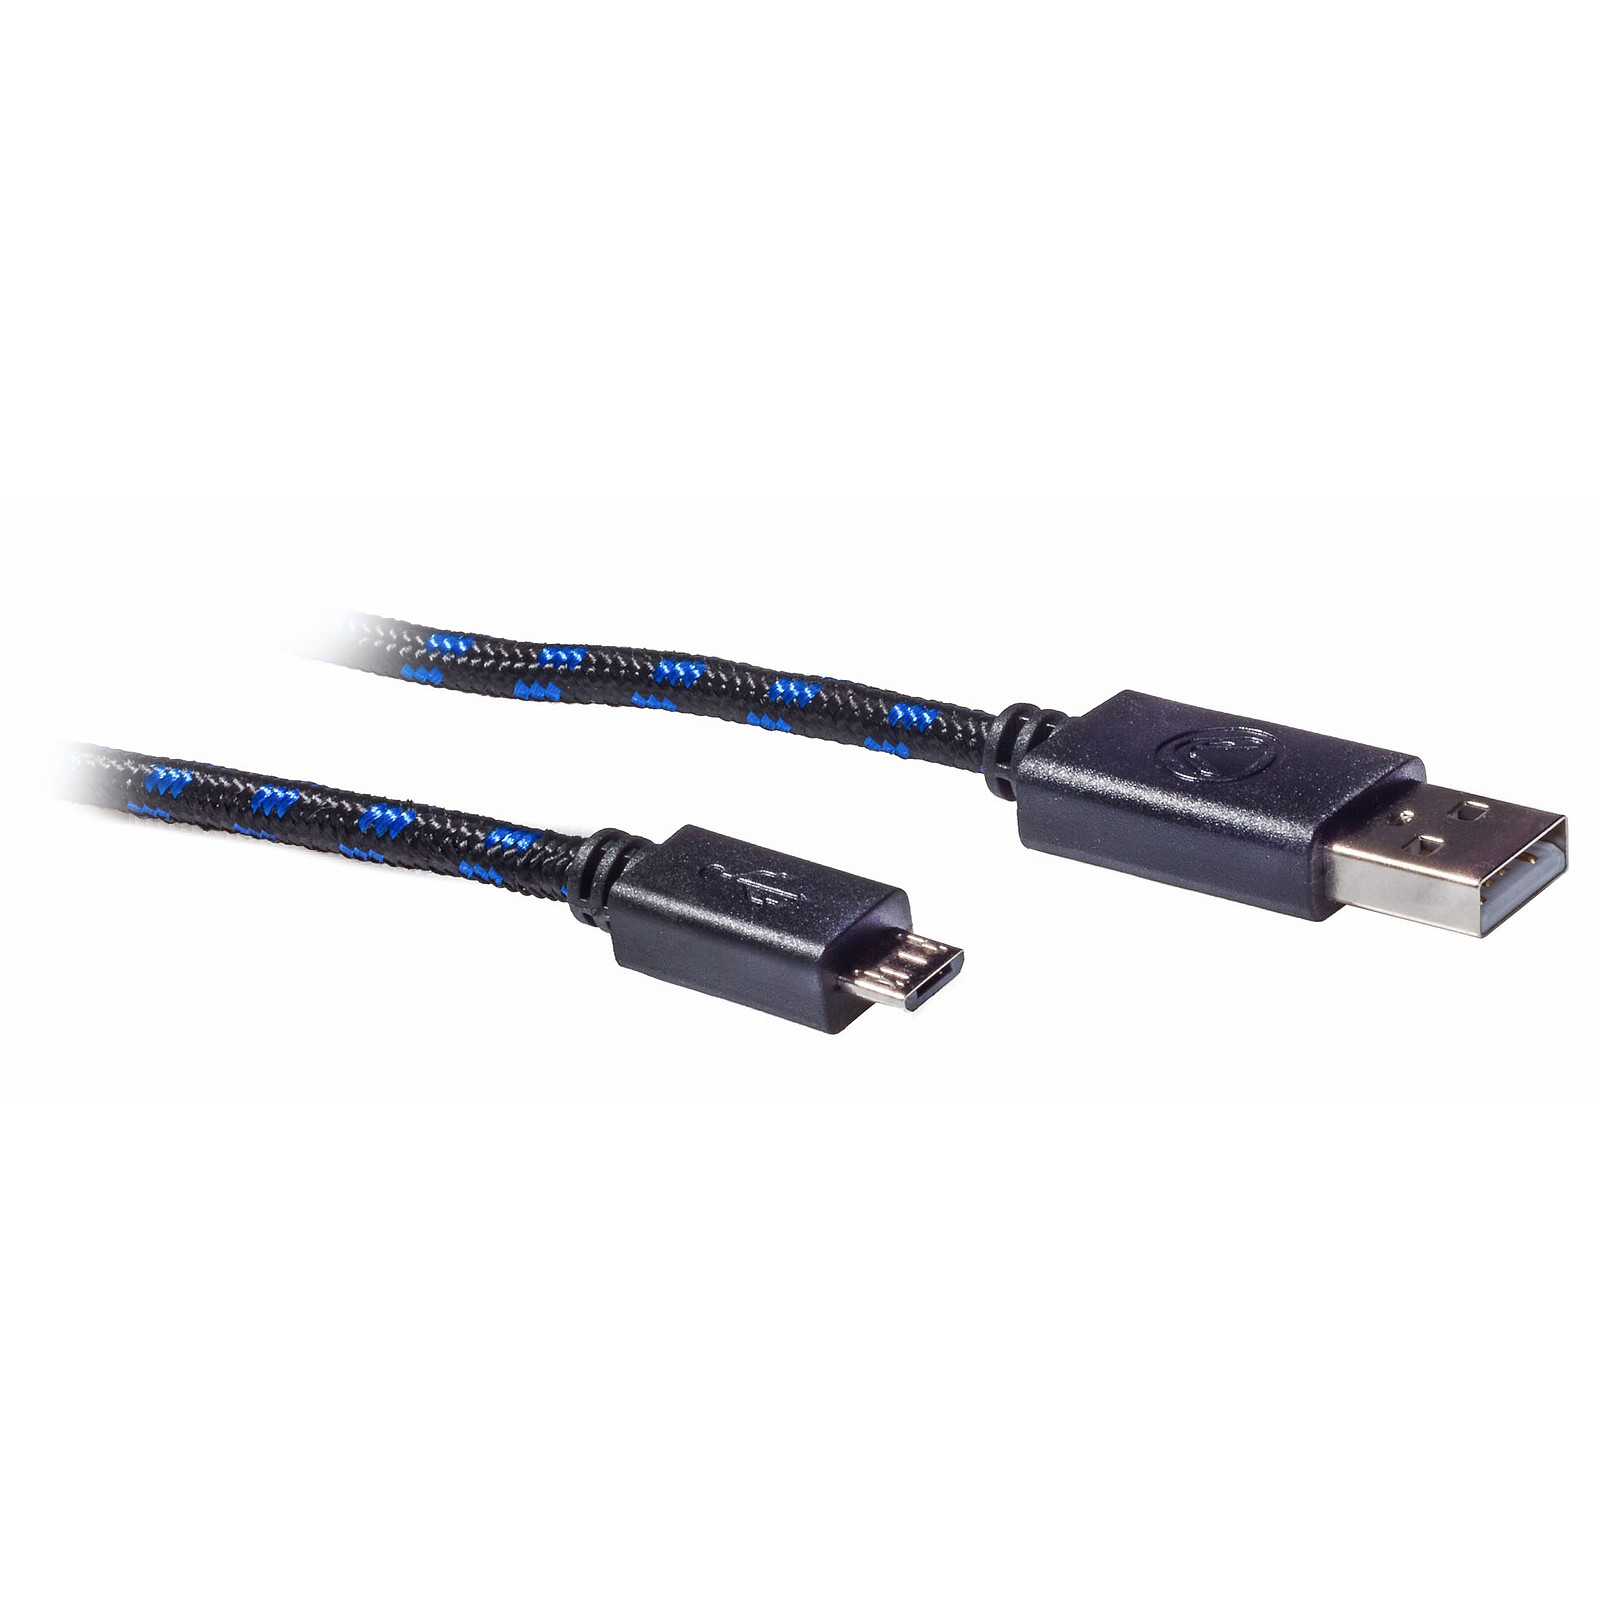 snakebyte - Cable de chargepour manette PS4 - Accessoires PS4 Snakebyte